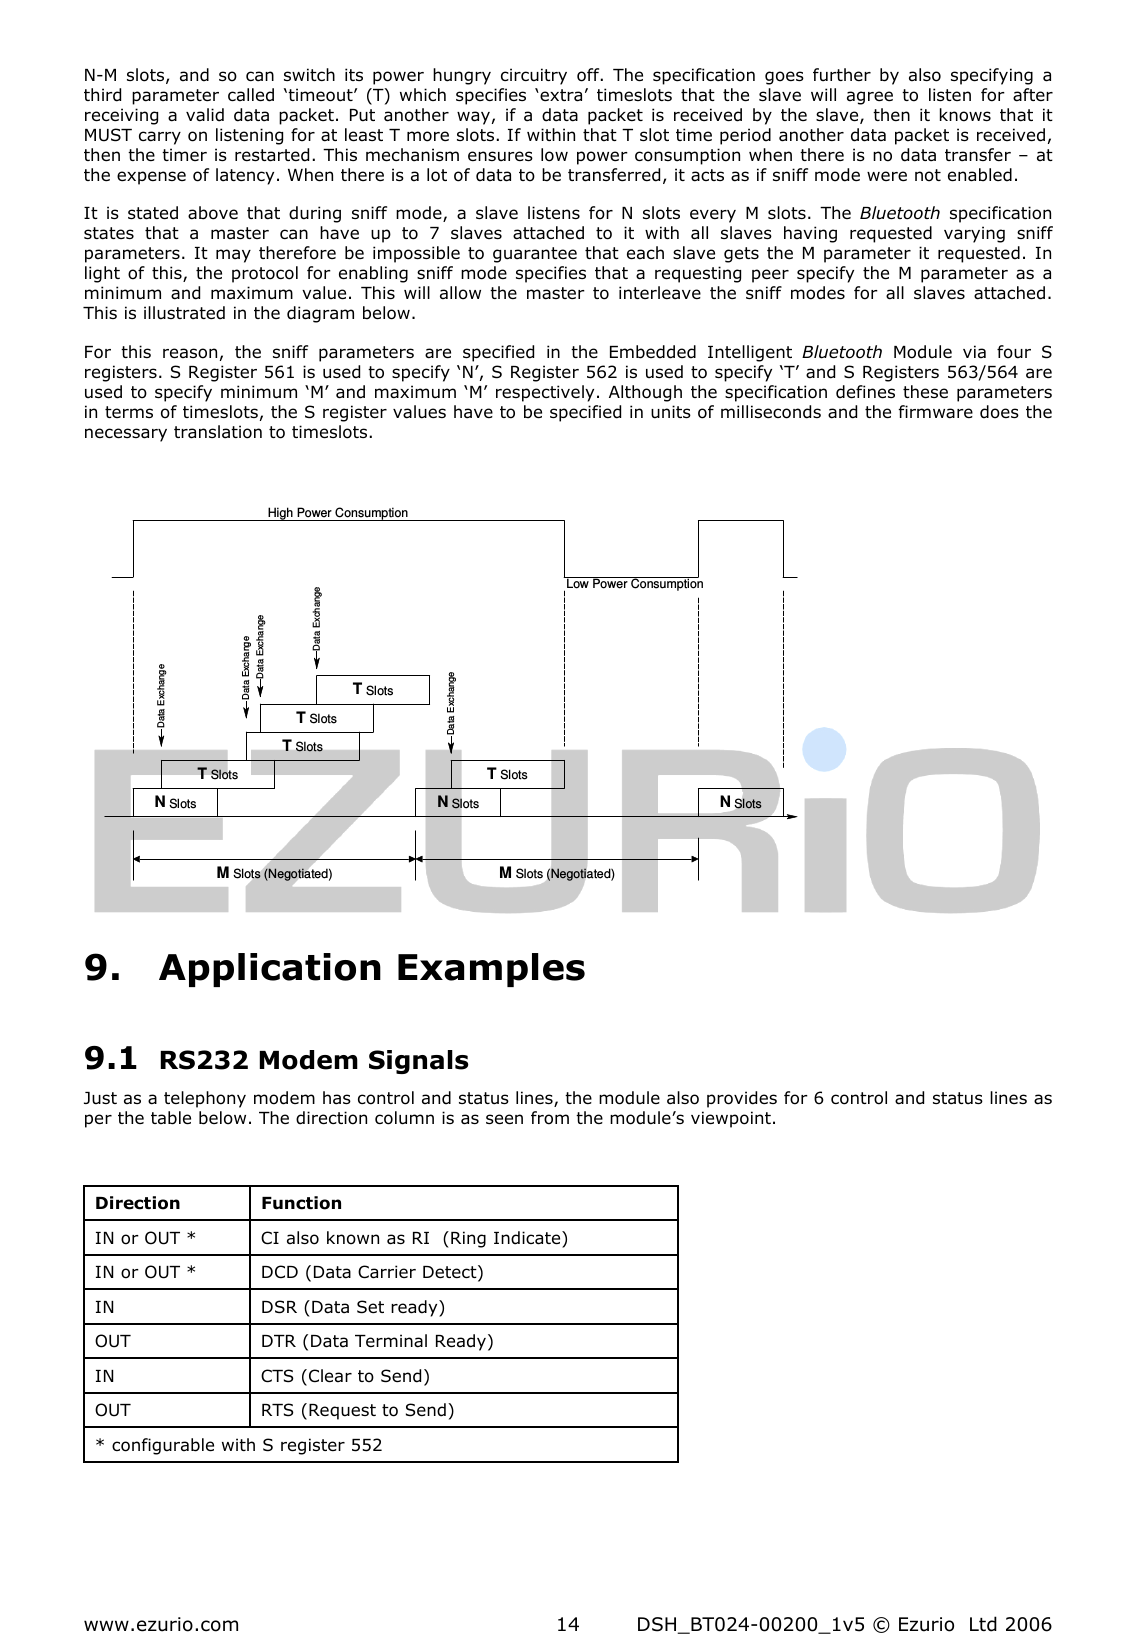  www.ezurio.com  DSH_BT024-00200_1v5 © Ezurio  Ltd 2006 14 N-M  slots,  and  so can  switch its  power  hungry  circuitry  off.  The  specification  goes  further  by  also  specifying  a third  parameter  called  ‘timeout’  (T)  which  specifies  ‘extra’  timeslots  that  the  slave  will  agree  to  listen  for  after receiving  a  valid data  packet.  Put  another  way,  if a  data packet  is  received  by the  slave,  then  it knows  that it MUST carry on listening for at least T more slots. If within that T slot time period another data packet is received, then the timer is restarted. This mechanism ensures low power consumption when there is no data transfer – at the expense of latency. When there is a lot of data to be transferred, it acts as if sniff mode were not enabled. It  is  stated  above  that  during  sniff  mode,  a  slave  listens  for  N  slots  every  M  slots.  The  Bluetooth  specification states  that  a  master  can  have  up  to  7  slaves  attached  to  it  with  all  slaves  having  requested  varying  sniff parameters. It may  therefore be impossible to guarantee that each slave gets the M parameter it requested. In light of this, the protocol  for  enabling  sniff  mode specifies  that a  requesting peer  specify  the  M parameter  as  a minimum and  maximum  value.  This  will allow  the master  to  interleave  the  sniff  modes  for  all  slaves  attached.  This is illustrated in the diagram below. For  this  reason,  the  sniff  parameters  are  specified  in  the  Embedded  Intelligent  Bluetooth  Module  via  four  S registers. S Register 561 is used to specify ‘N’, S Register 562 is used to specify ‘T’ and S Registers 563/564 are used to specify minimum ‘M’ and maximum ‘M’ respectively. Although the specification defines these parameters in terms of timeslots, the S register values have to be specified in units of milliseconds and the firmware does the necessary translation to timeslots.  Data ExhangeHigh Power ConsumptionLow Power ConsumptionM Slots (Negotiated)M Slots (Negotiated)N SlotsN SlotsN SlotsT SlotsT SlotsT SlotsT SlotsT SlotsData ExchangeData ExchangeData ExchangeData ExchangeData Exchange 9. Application Examples 9.1 RS232 Modem Signals Just as a telephony modem has control and status lines, the module also provides for 6 control and status lines as per the table below. The direction column is as seen from the module’s viewpoint.  Direction  Function IN or OUT *  CI also known as RI  (Ring Indicate) IN or OUT *  DCD (Data Carrier Detect) IN  DSR (Data Set ready) OUT  DTR (Data Terminal Ready) IN  CTS (Clear to Send) OUT  RTS (Request to Send) * configurable with S register 552    